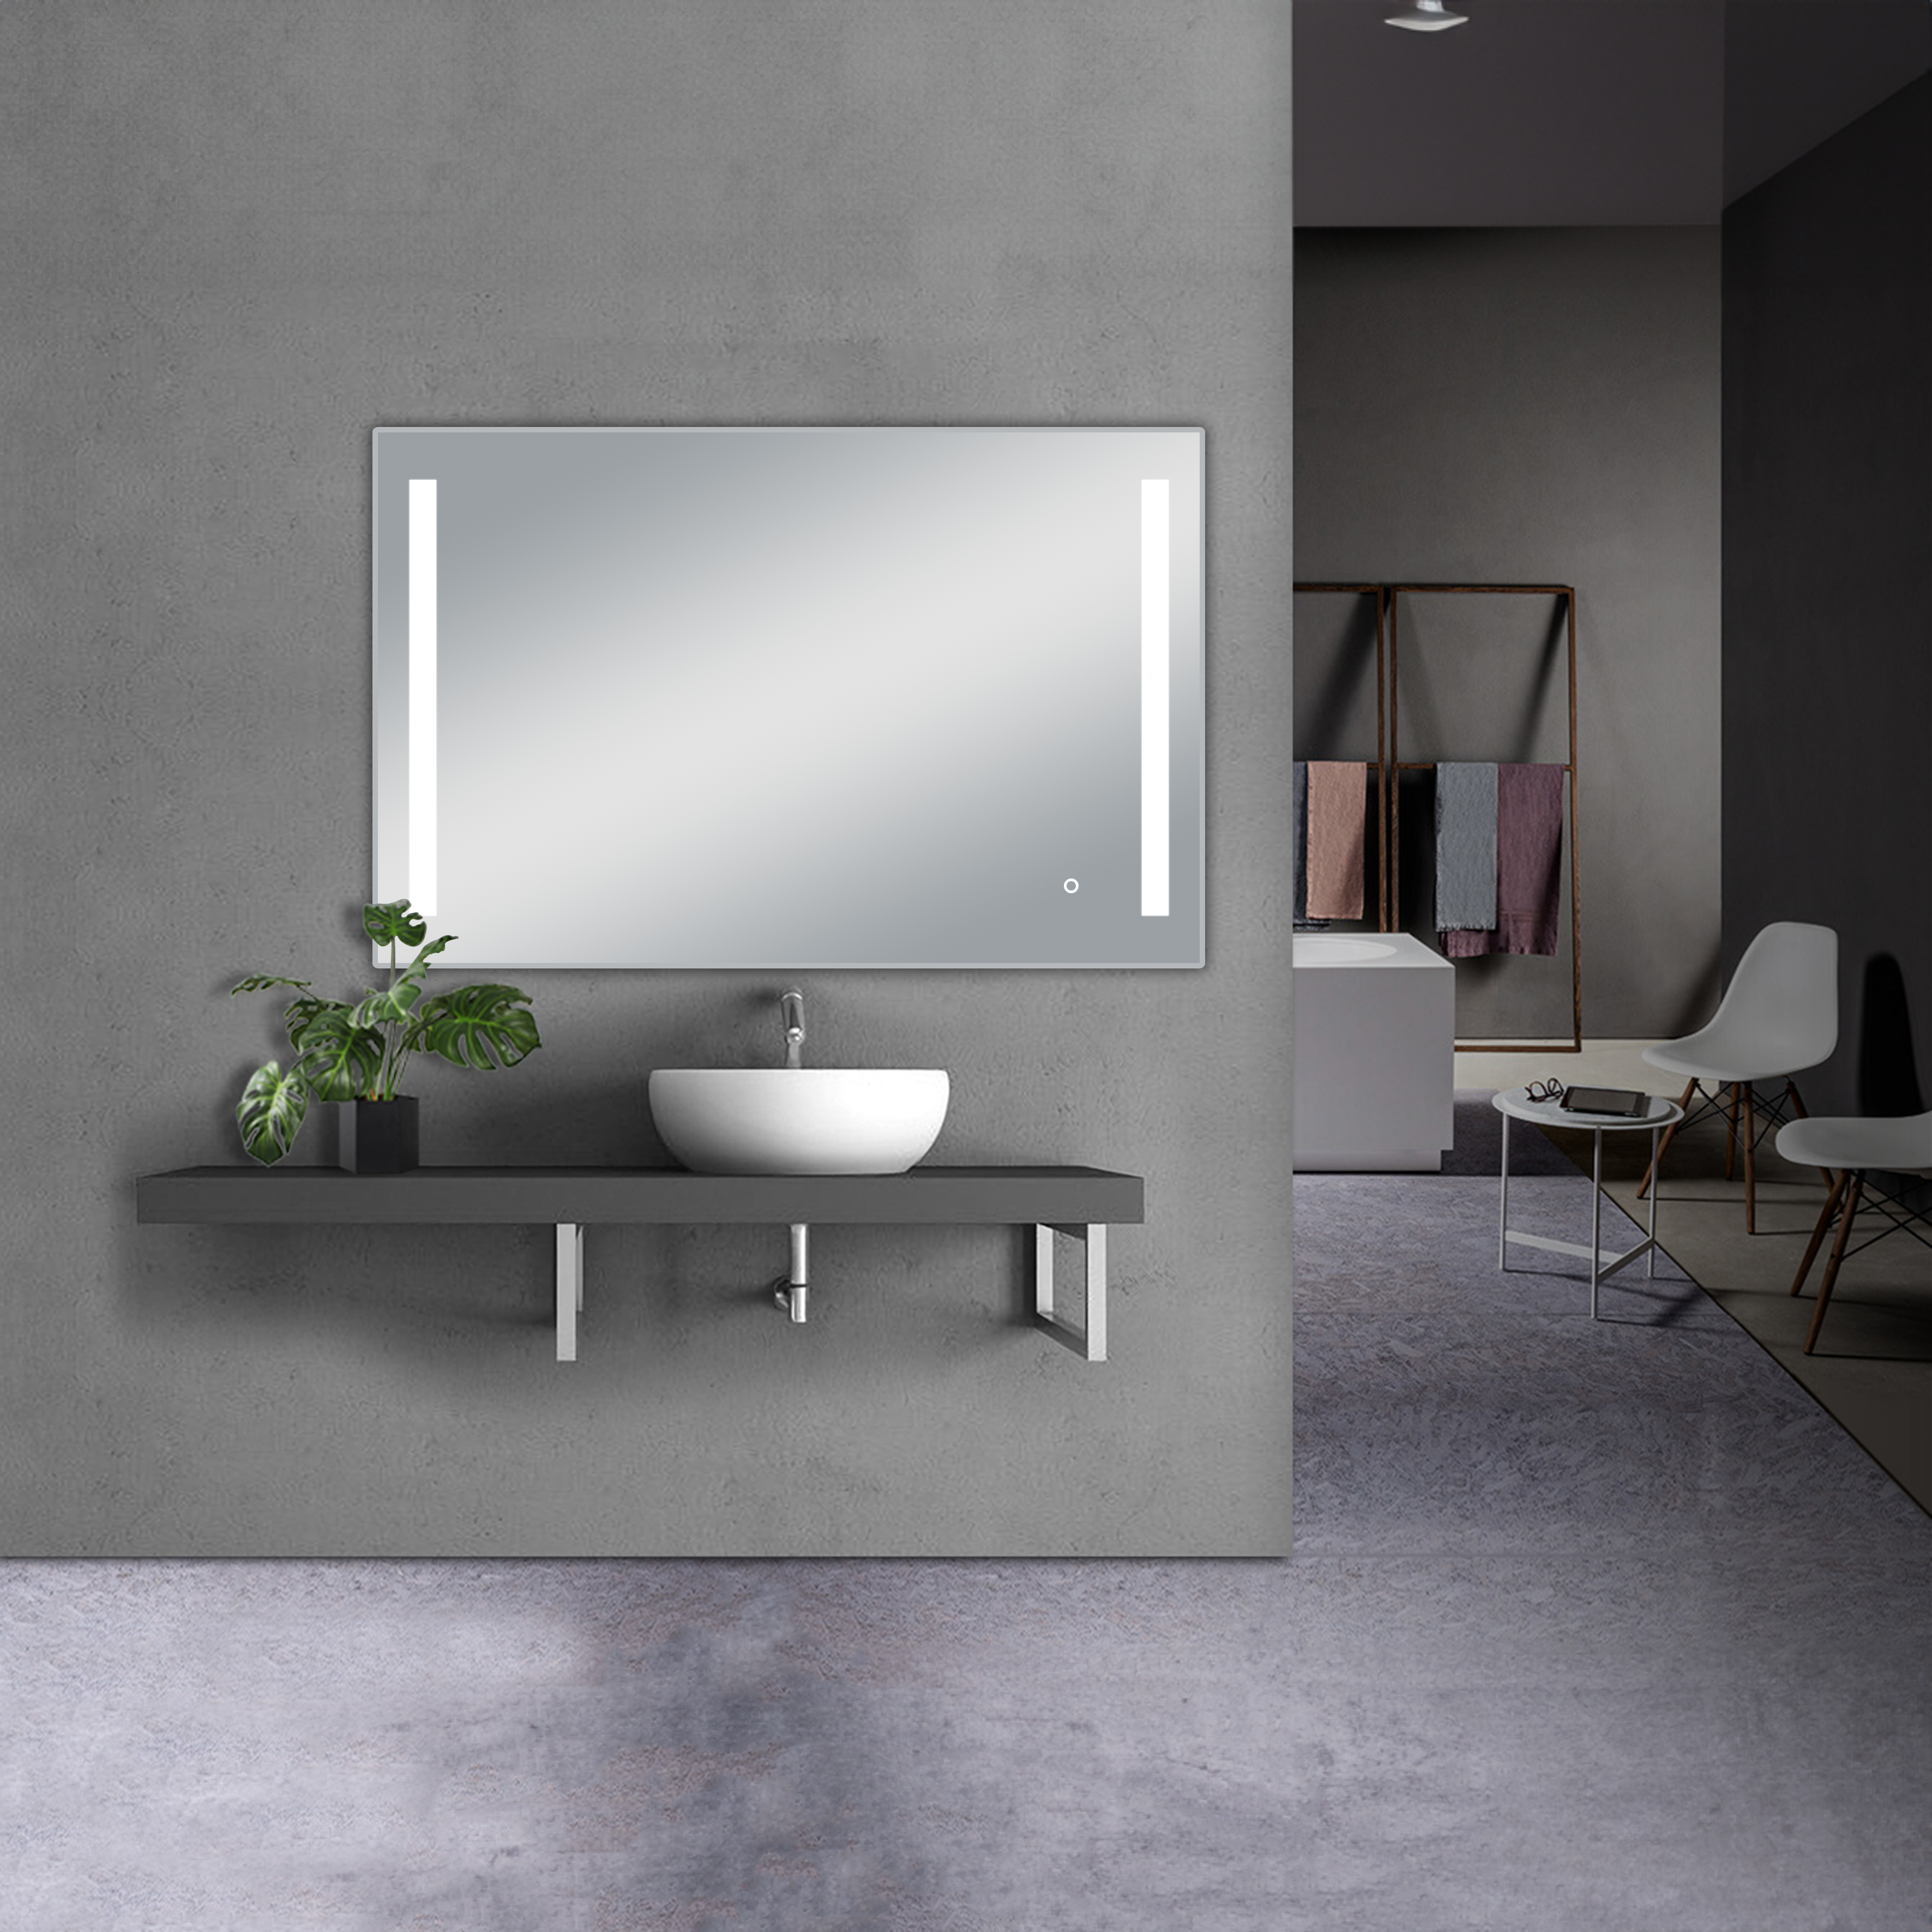 Treviso LED Mirror with Dimmer and Defogger - Available in 4 Sizes